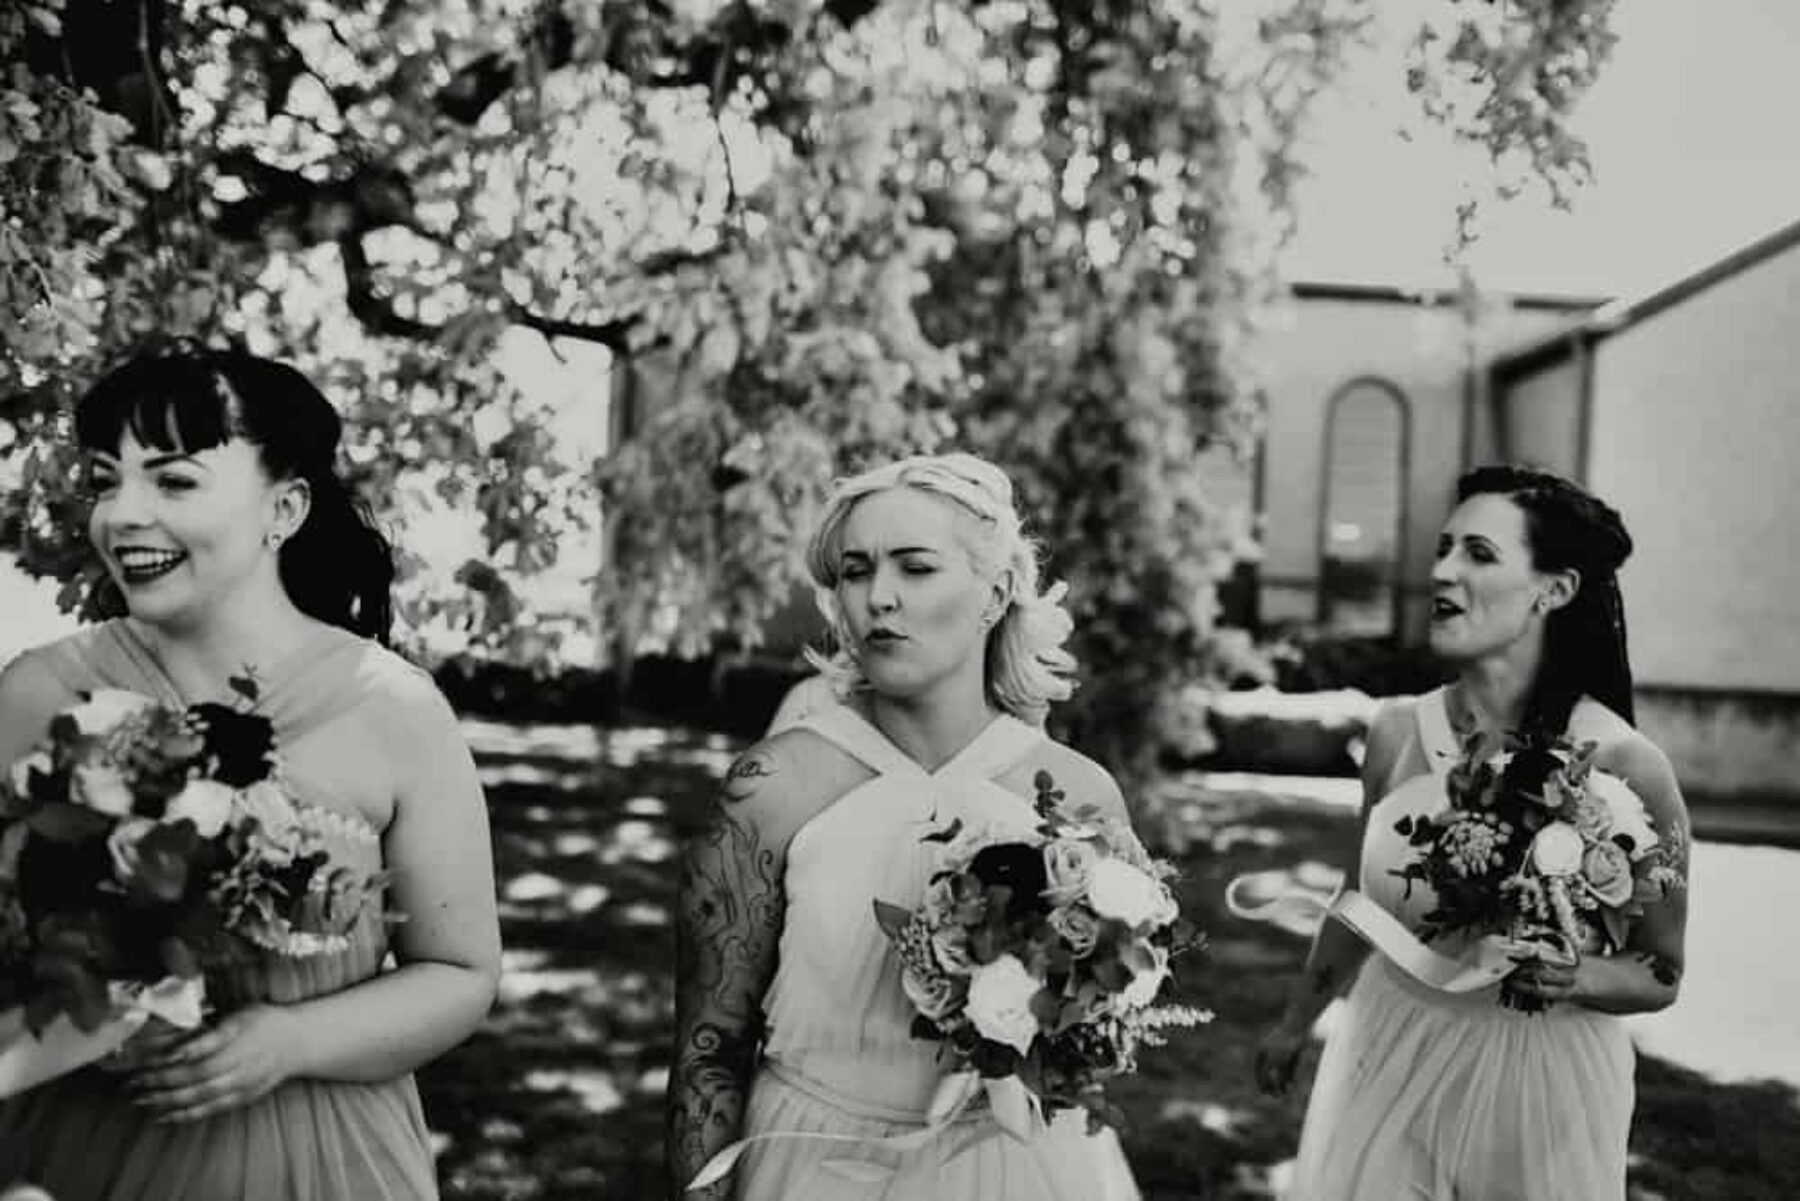 Stones of the Yarra Valley wedding / photography by Lilli Waters, I Got You Babe